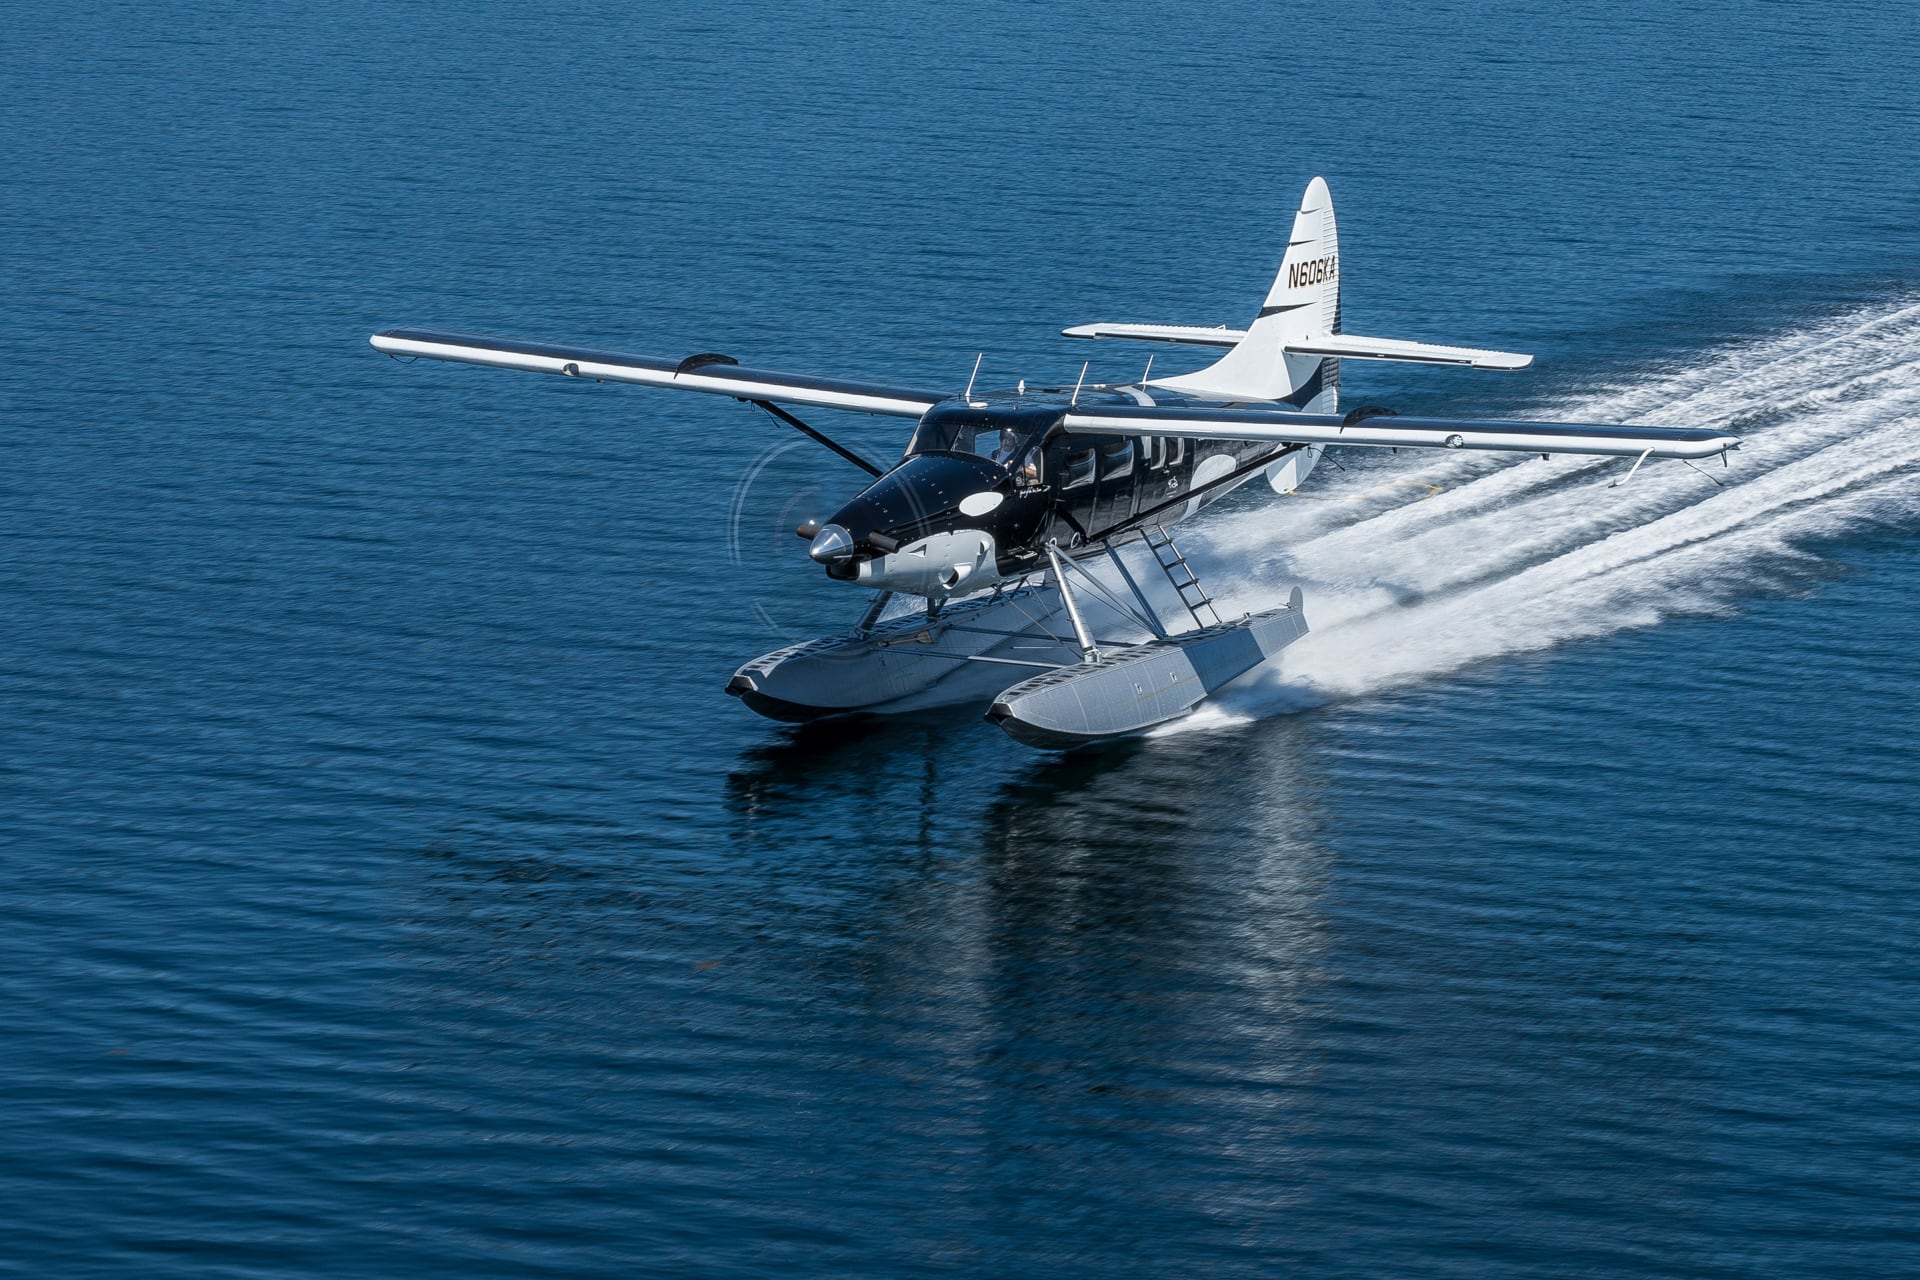 A seaplane painted like an orca on the water.